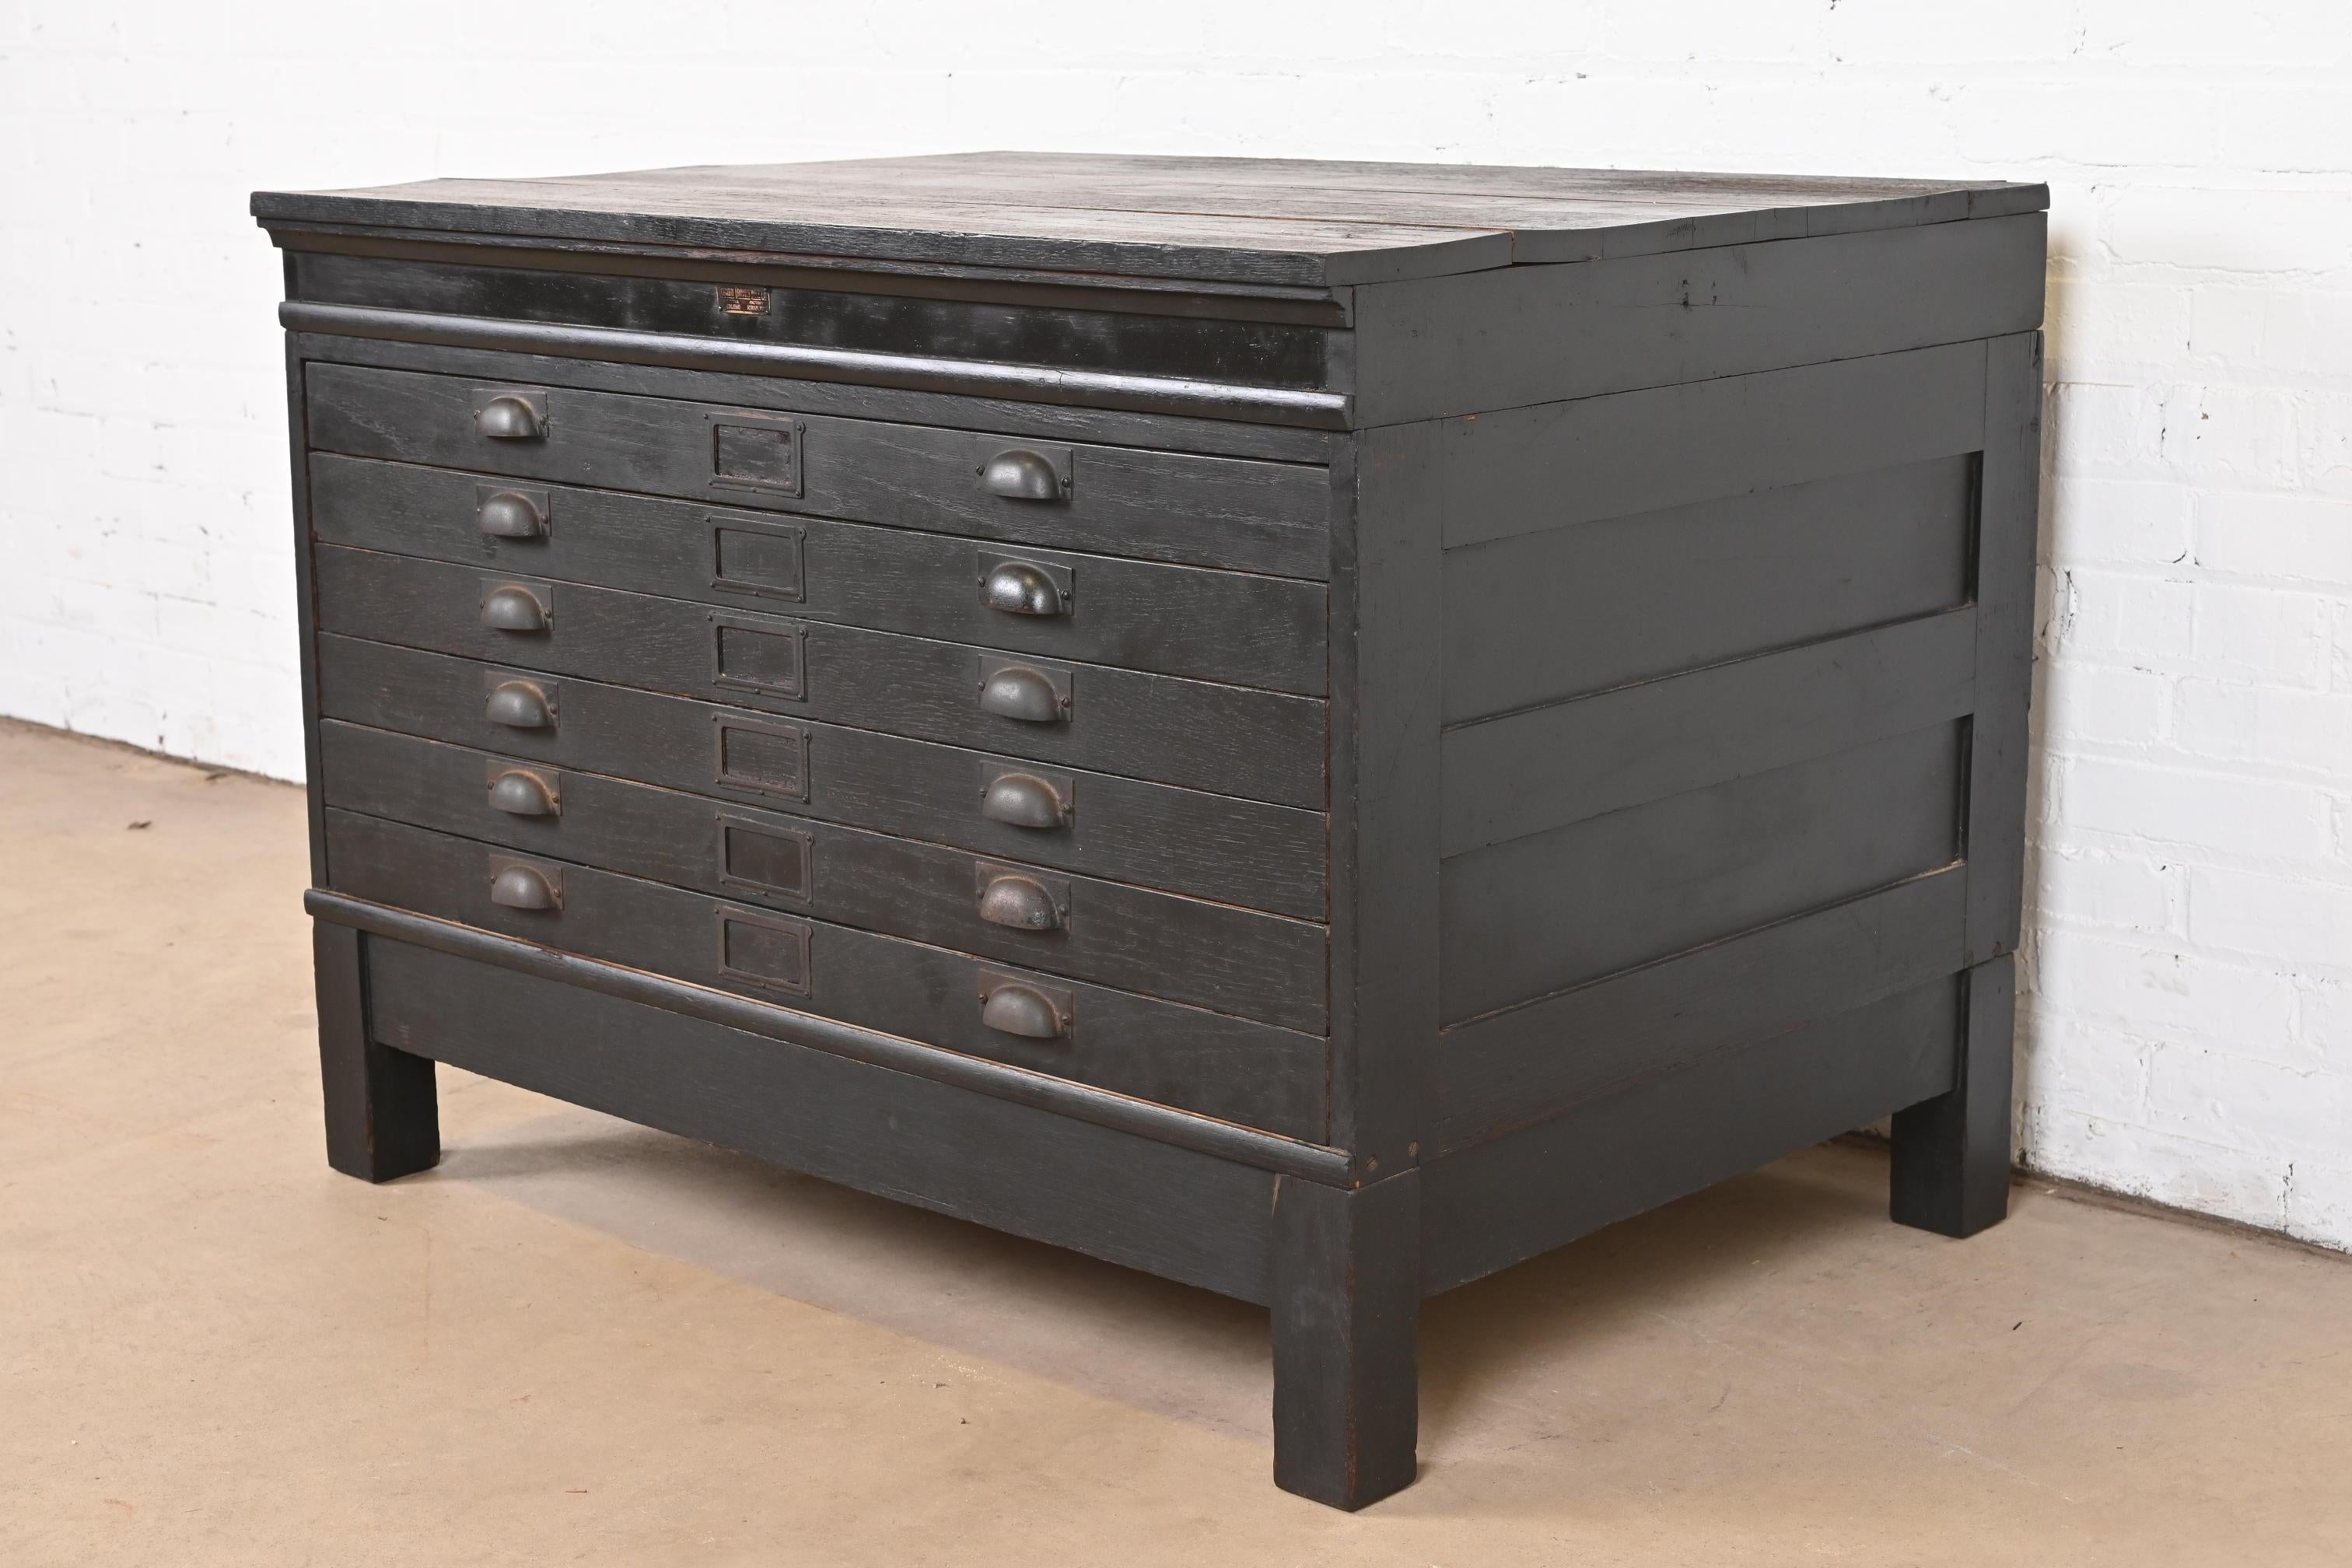 A rare antique Arts & Crafts six-drawer architect's blueprint or map flat file cabinet

In the manner of Hamilton Manufacturing Co.

USA, Circa 1900

Oak in ebonized finish, with original hardware.

Measures: 41